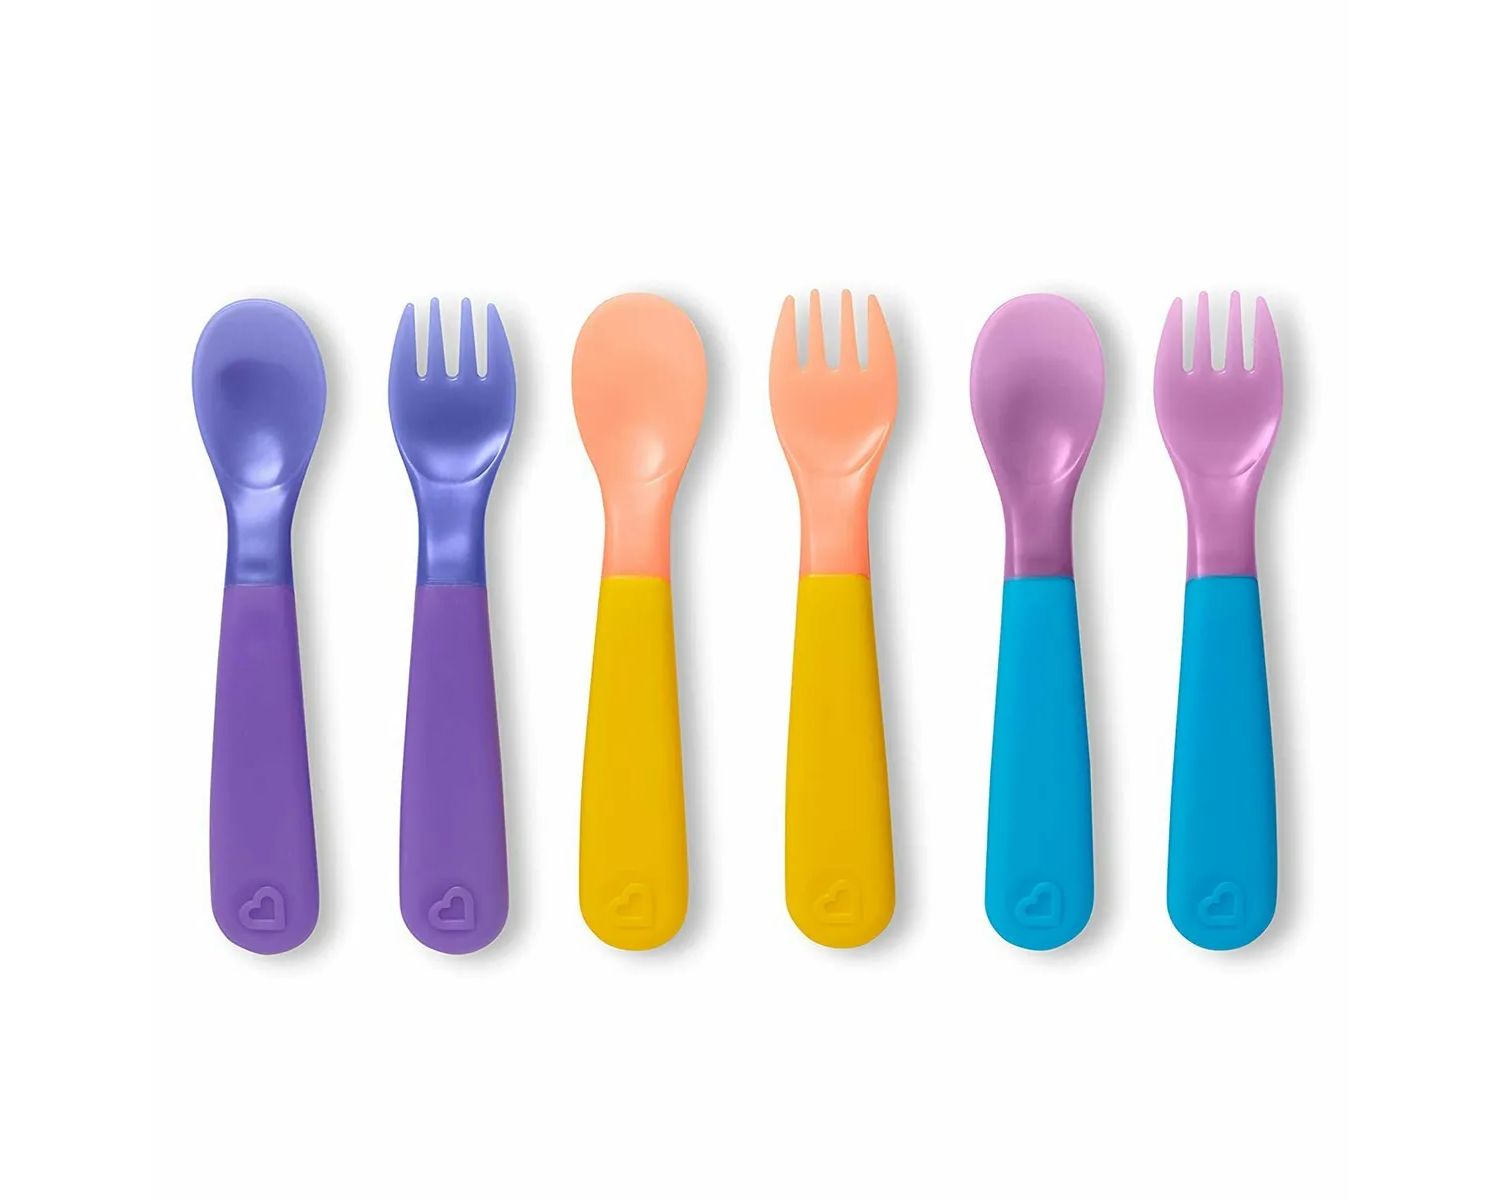 Review: Color-changing baby spoons